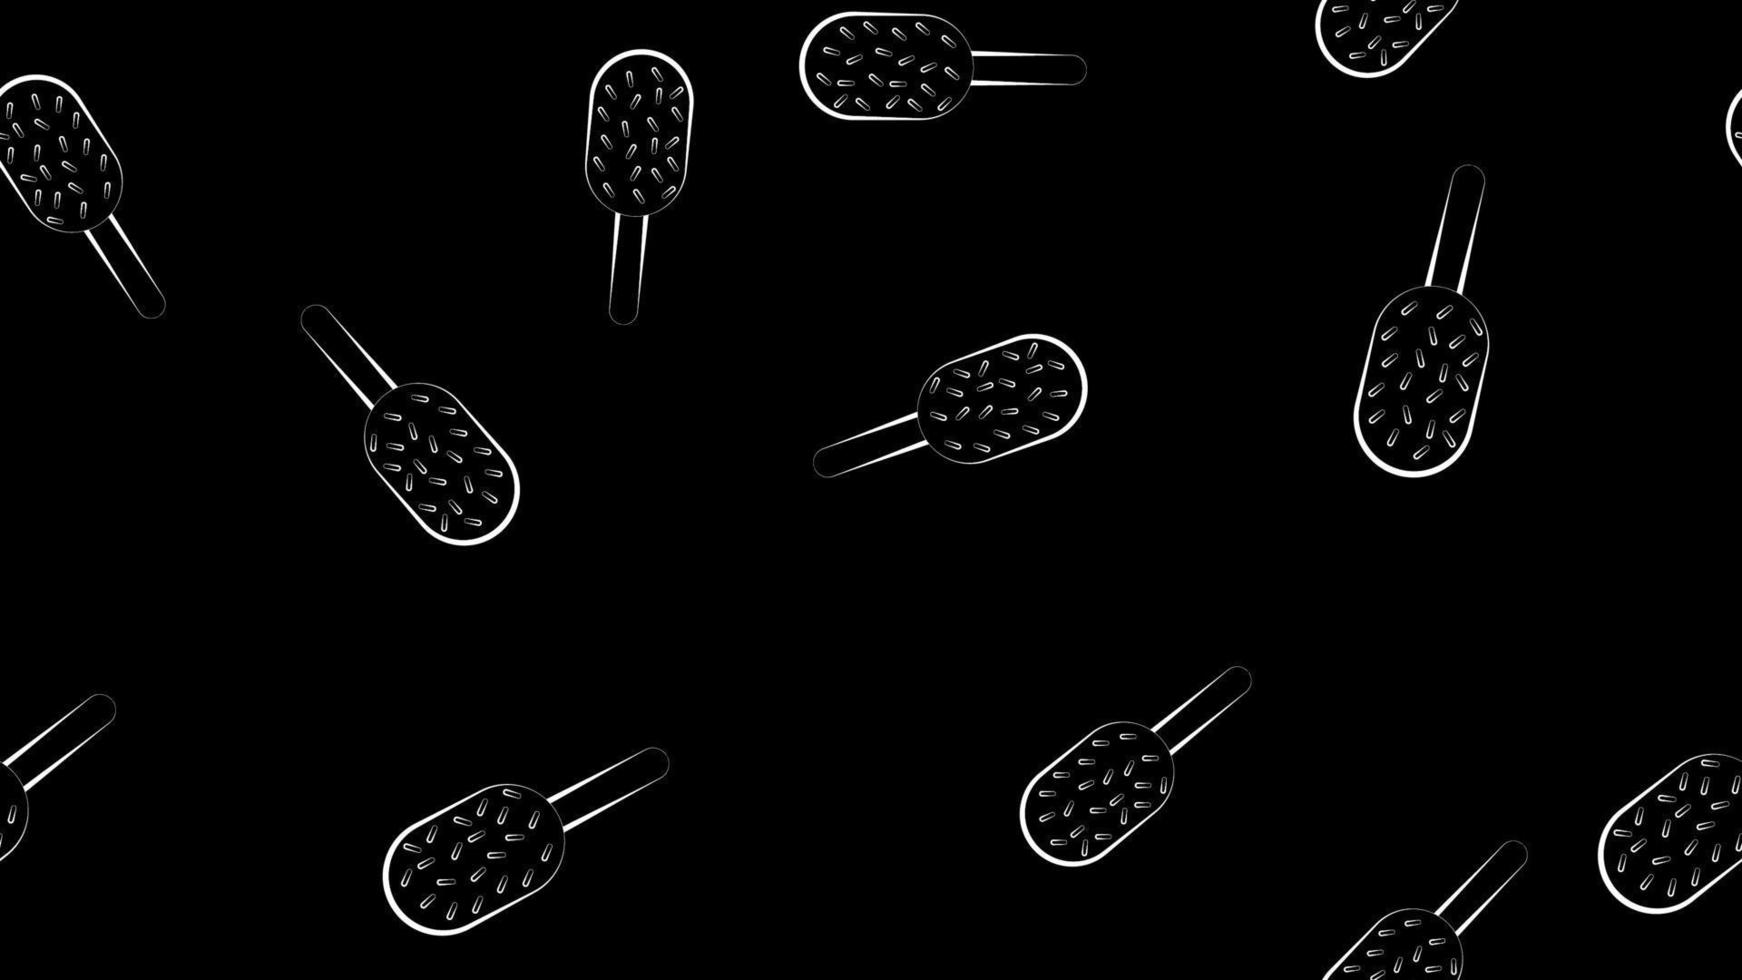 ice cream on a stick on a black background, pattern, vector illustration. ice cream with sugar sprinkles. wallpaper for cafes and restaurants in the style of pencil drawings